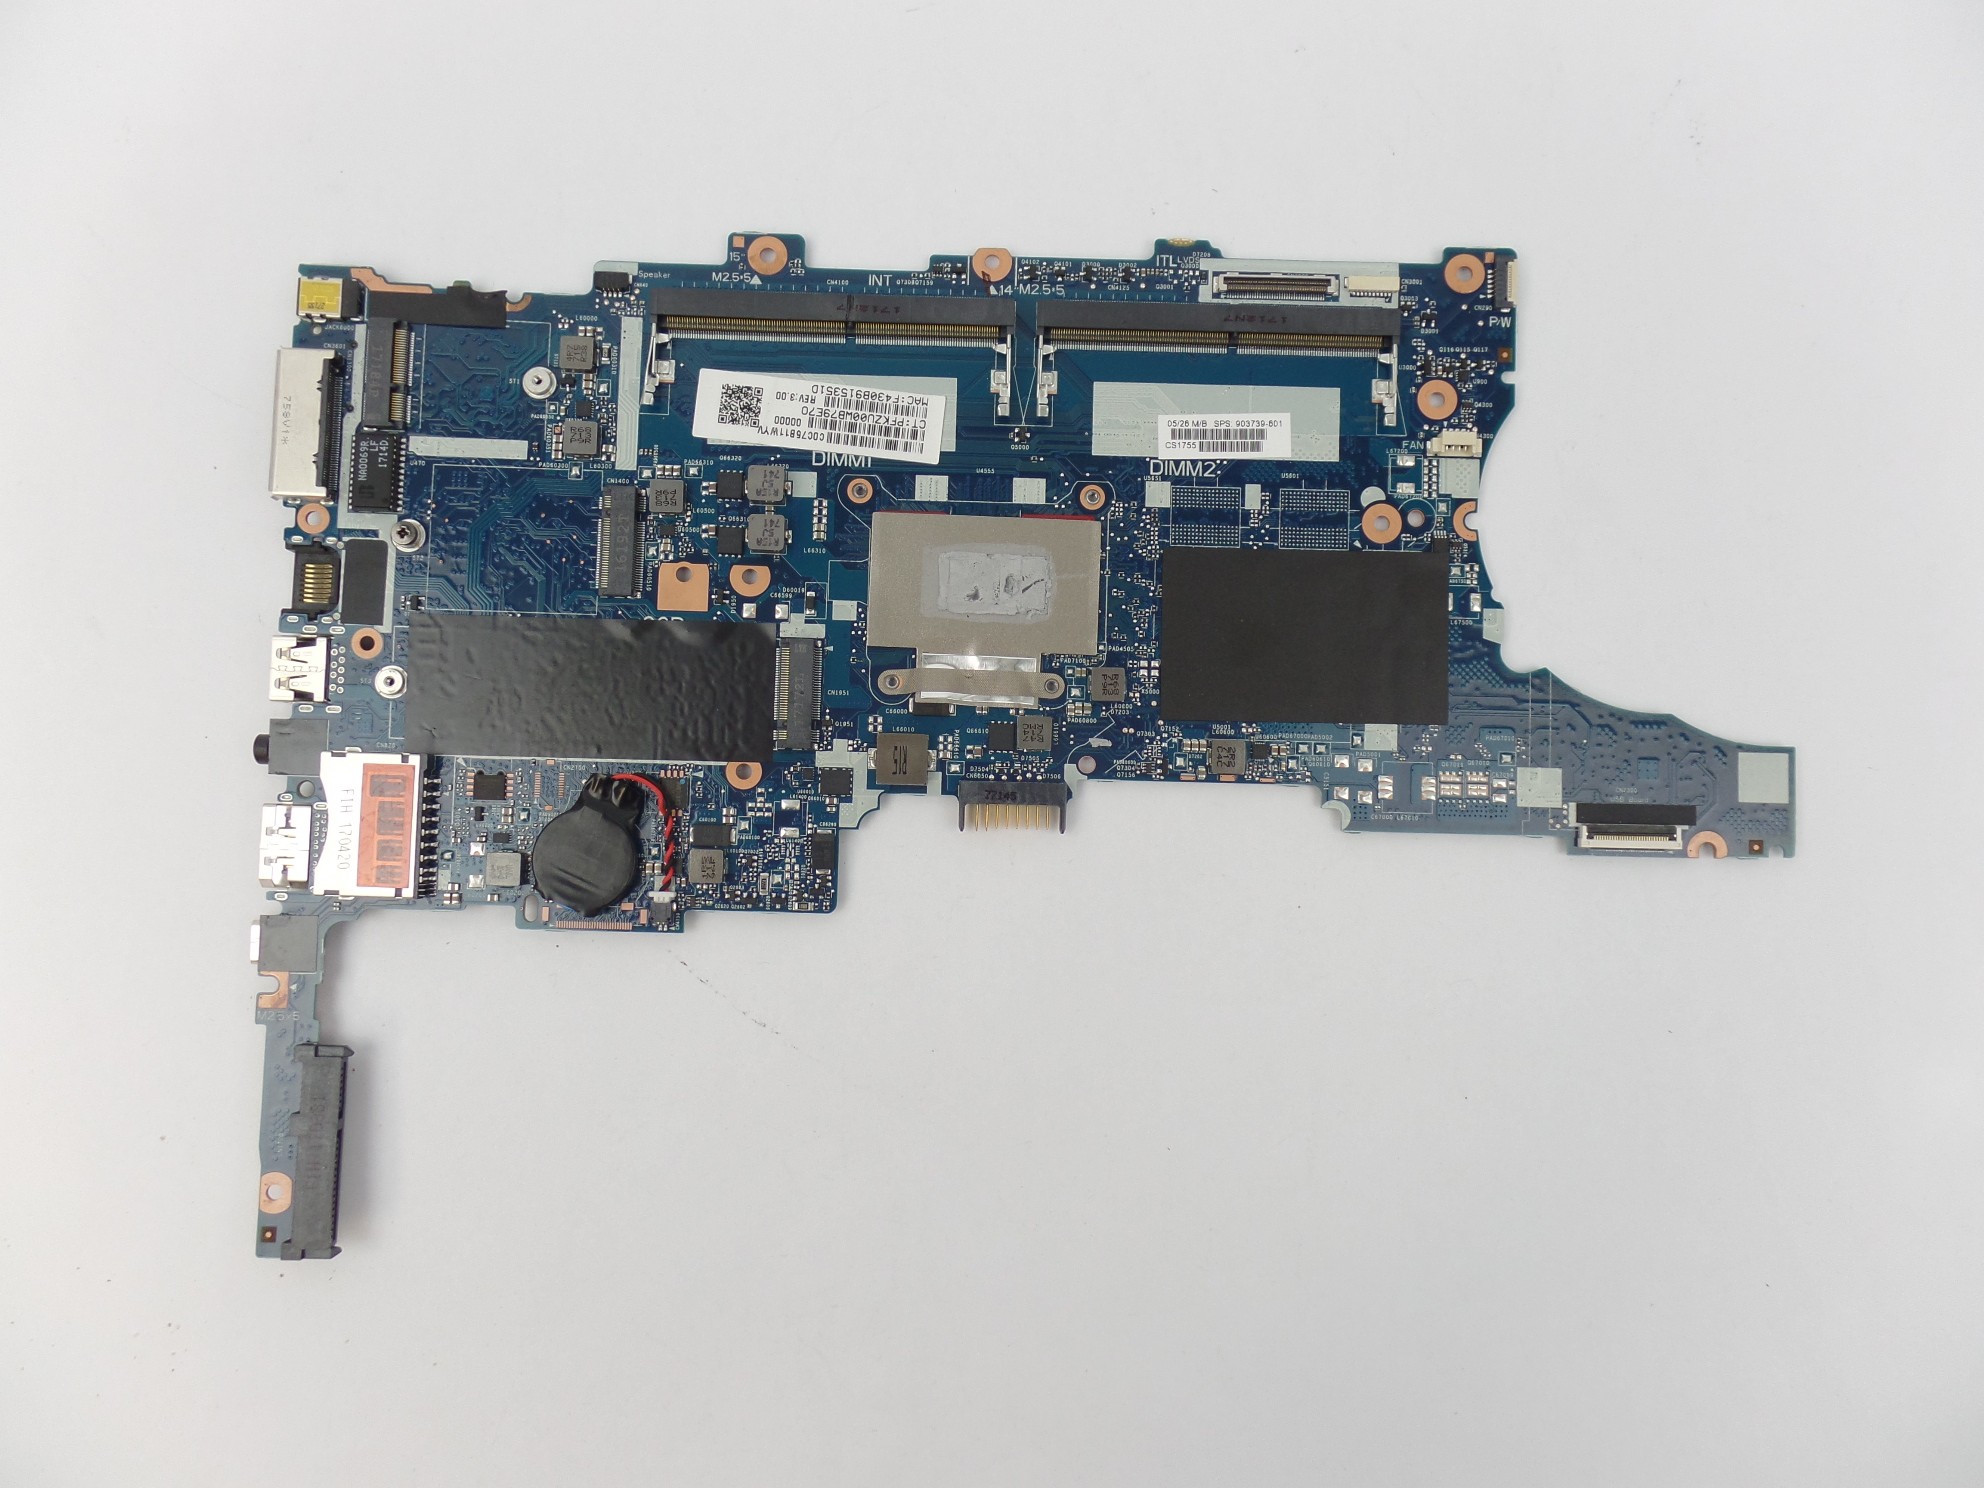 READ: No power. For parts Motherboard for HP Elitebook 840 G3 903739-601 